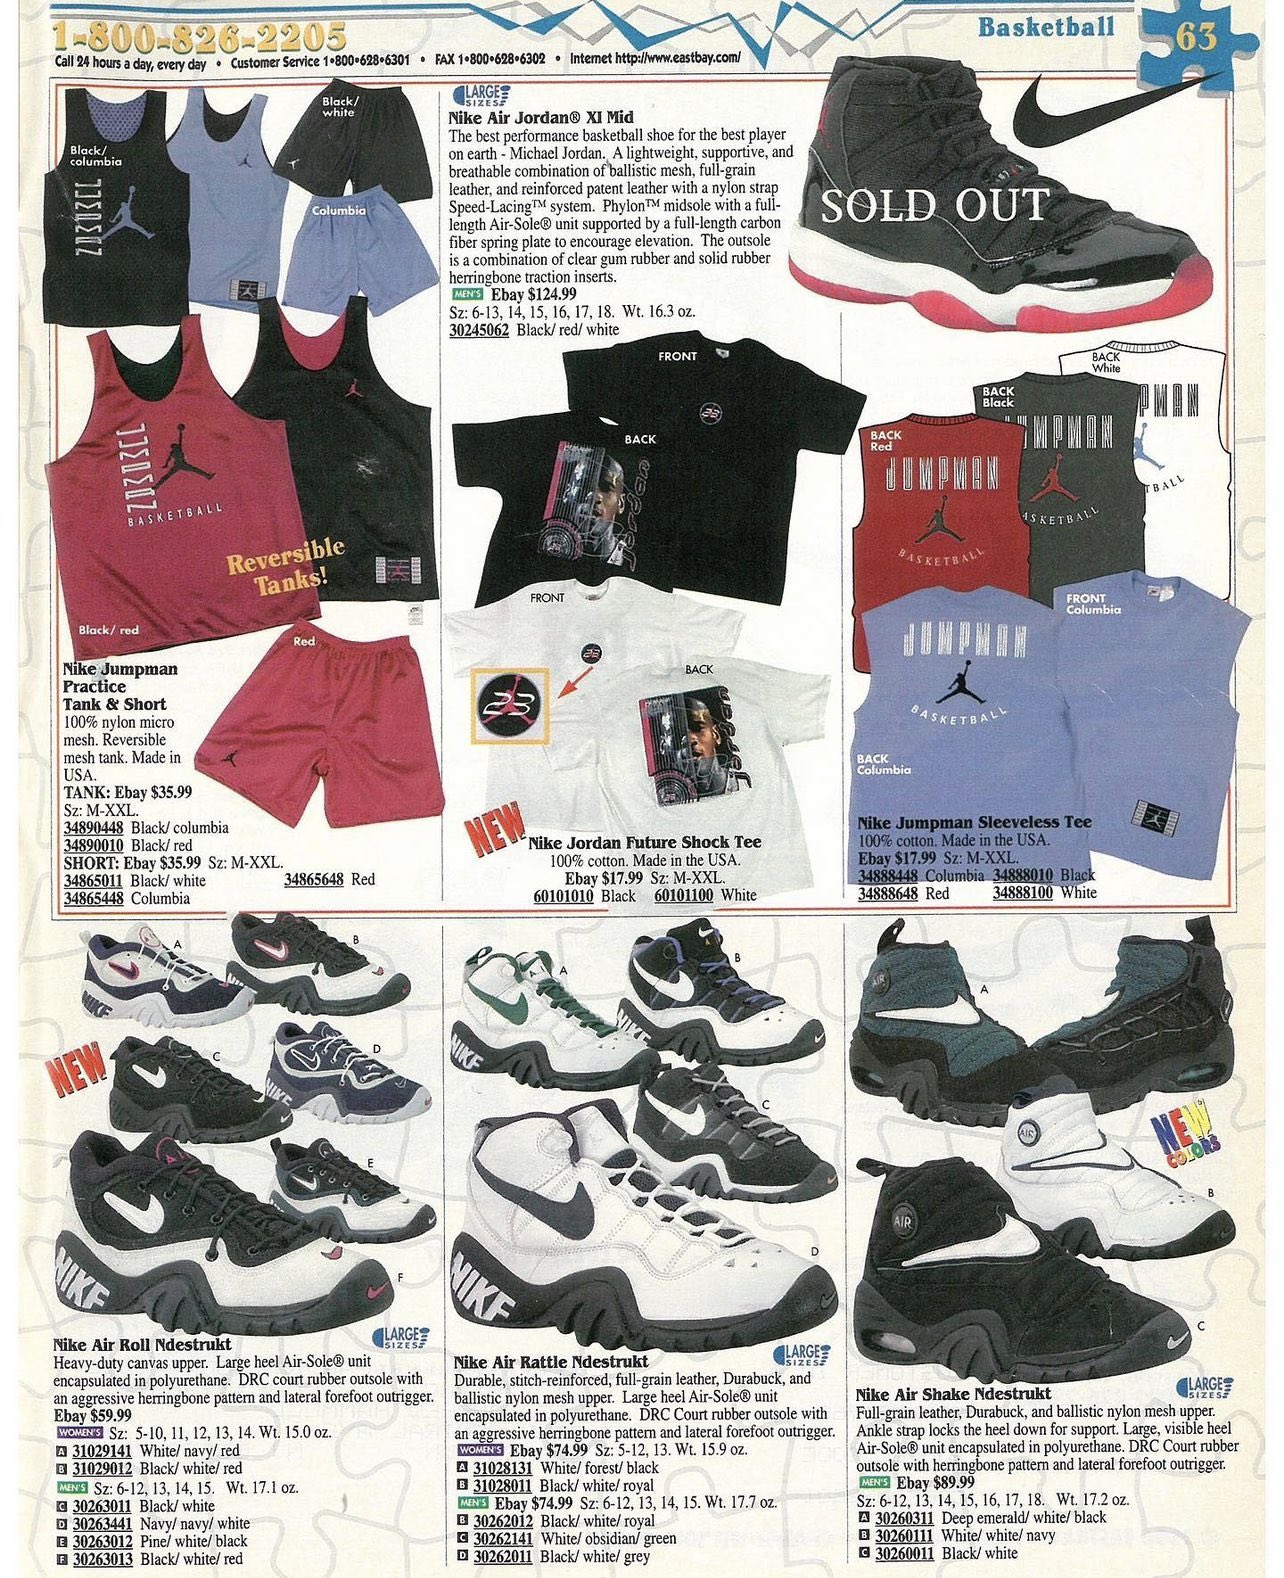 Lægge sammen Mål uddrag Nick DePaula on Twitter: "If you're feelin nostalgic about @Eastbay and  want to still check out old pages from issues, definitely check out:  https://t.co/65a1g4jCP8 https://t.co/muegdFy6z6 https://t.co/aAAtigkVJs" /  Twitter